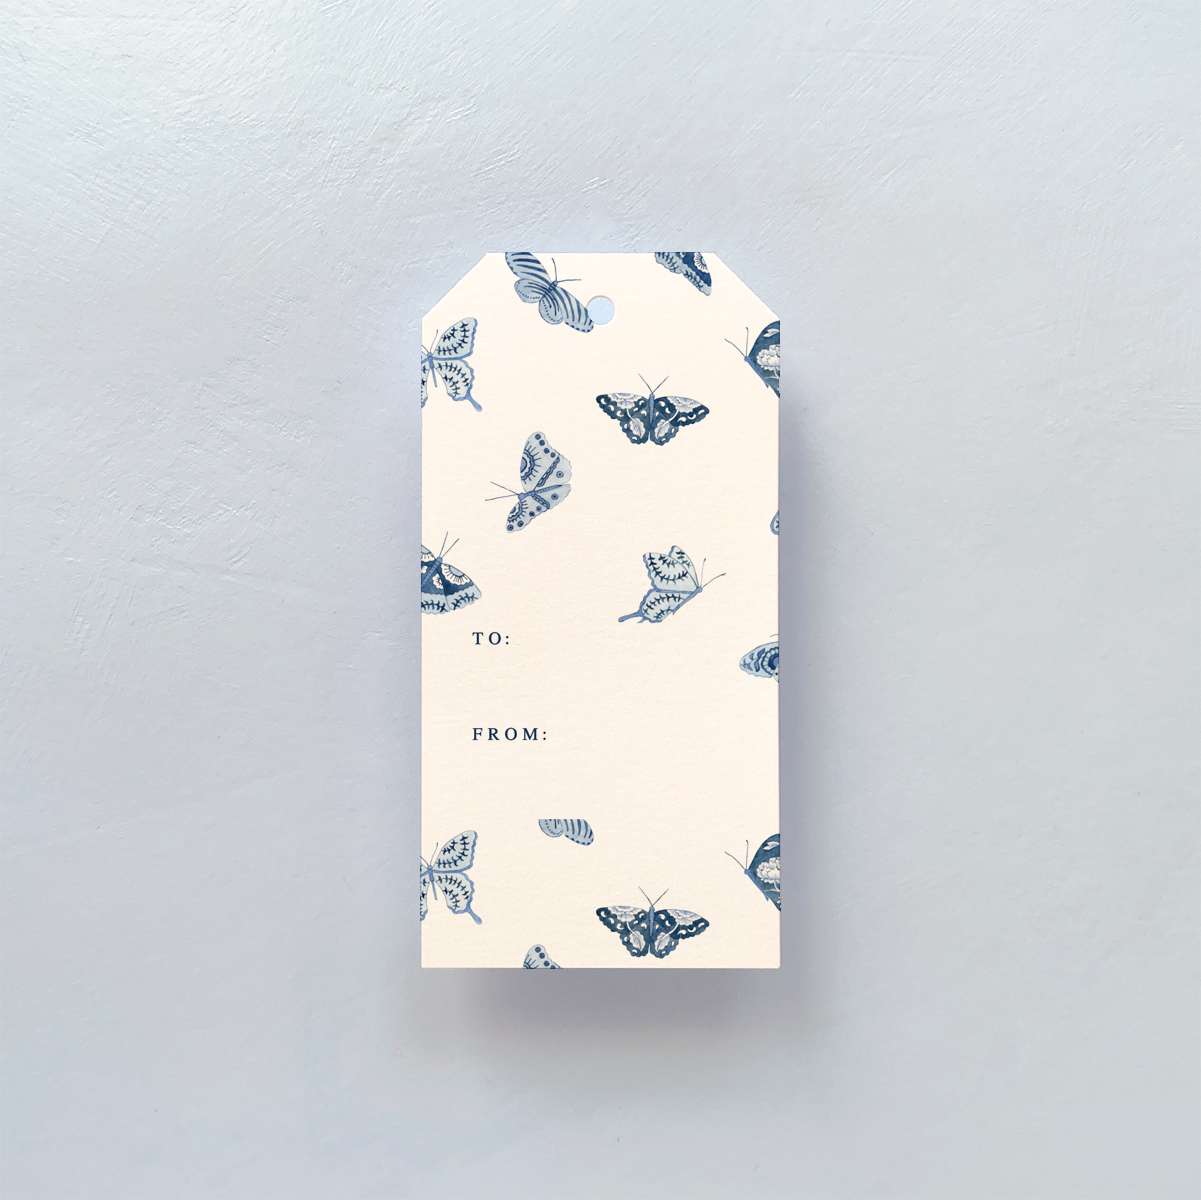 GIFT TAG WITH BLUE AND WHITE BUTTERFLY DESIGN